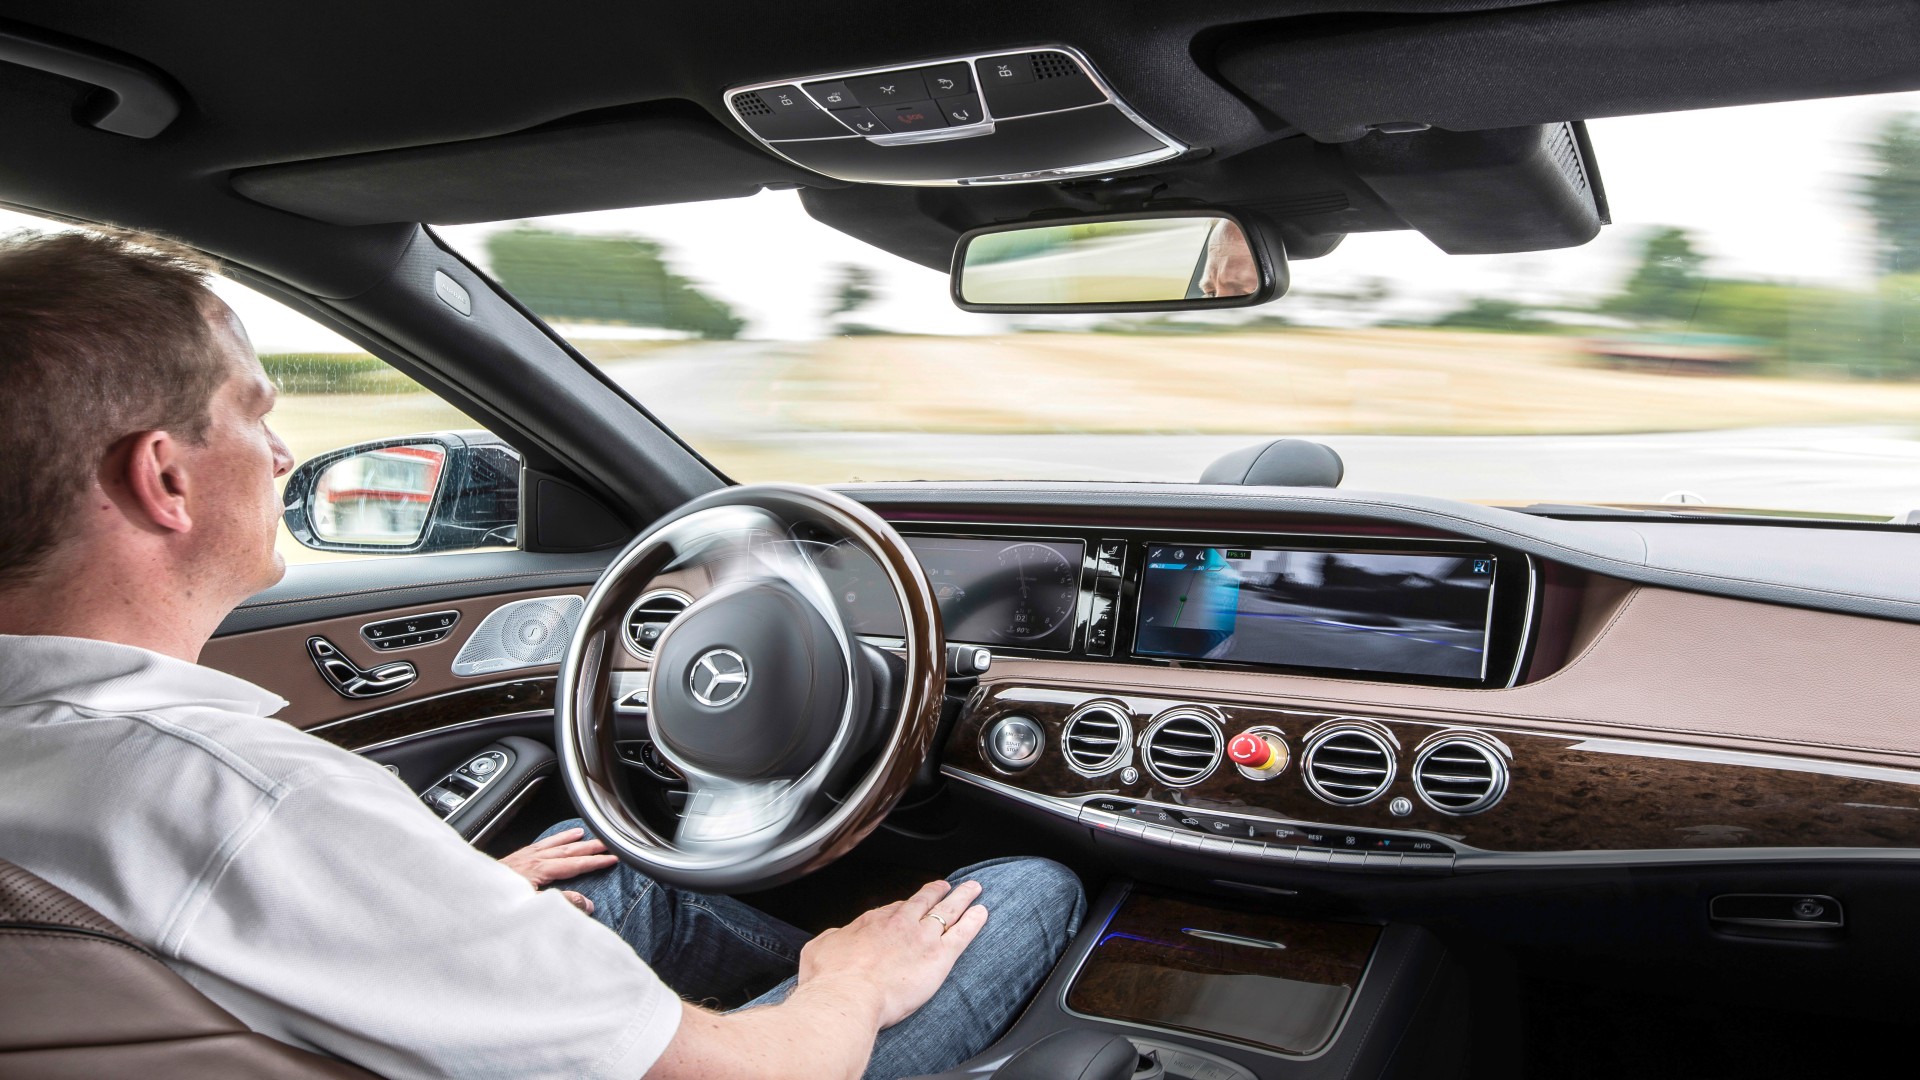 The S 500 INTELLIGENT DRIVE by Mercedes-Benz on an autonomously driven journey.